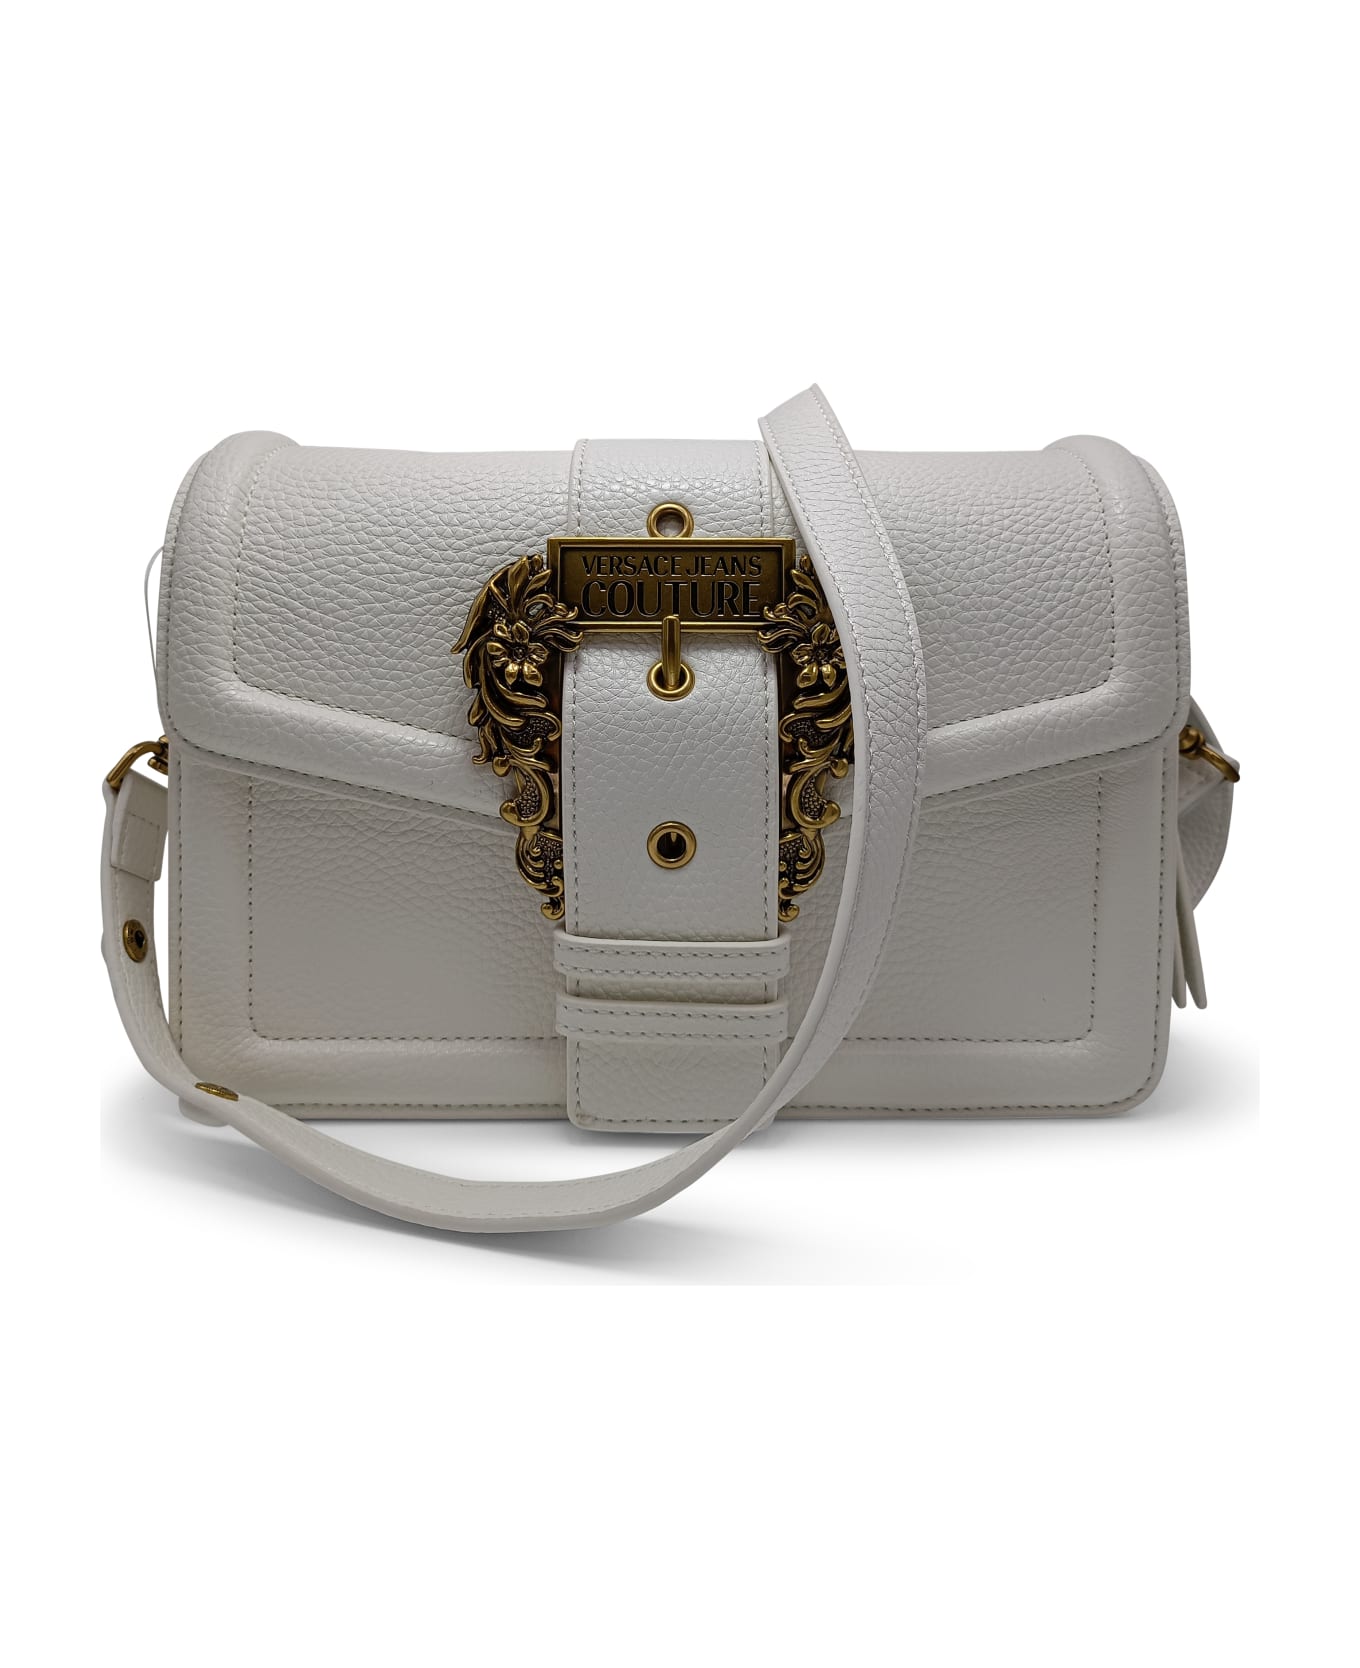 Versace Jeans Couture Bag - Bianco